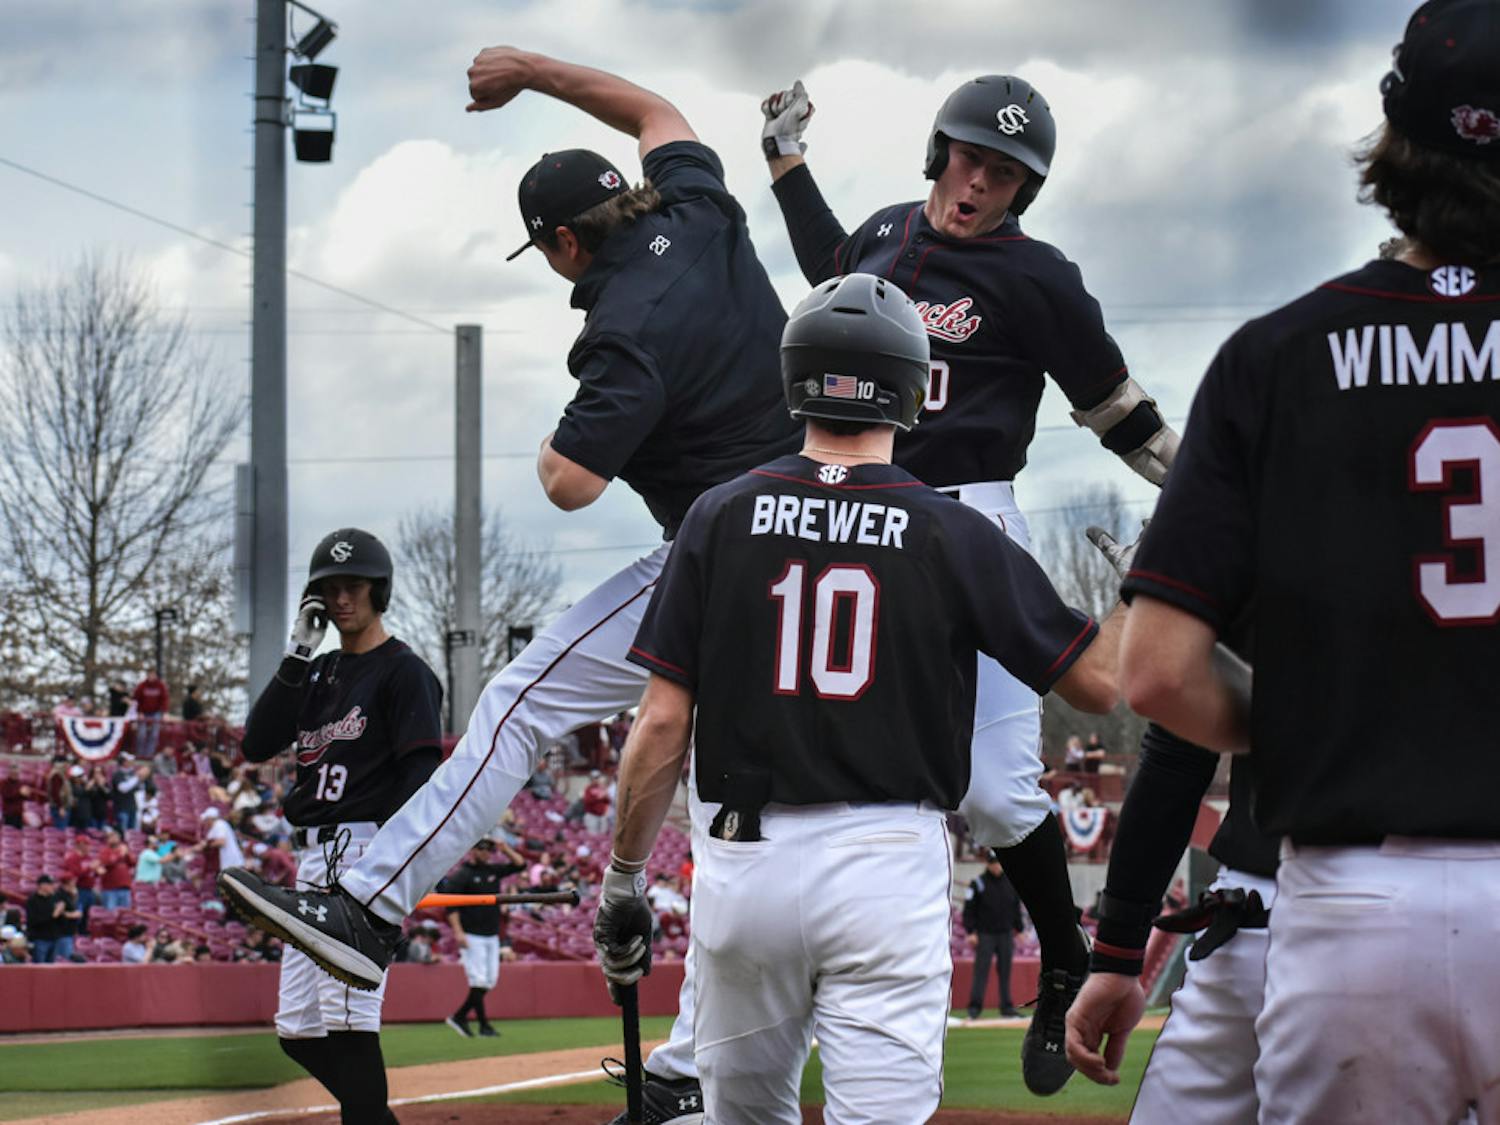 The South Carolina baseball team swept its season-opening series against UMass Lowell on Feb. 17, 18 and 19, 2023 at Founders Park. The Gamecocks outscored the River Hawks by a combined 49-5 score over the three games.